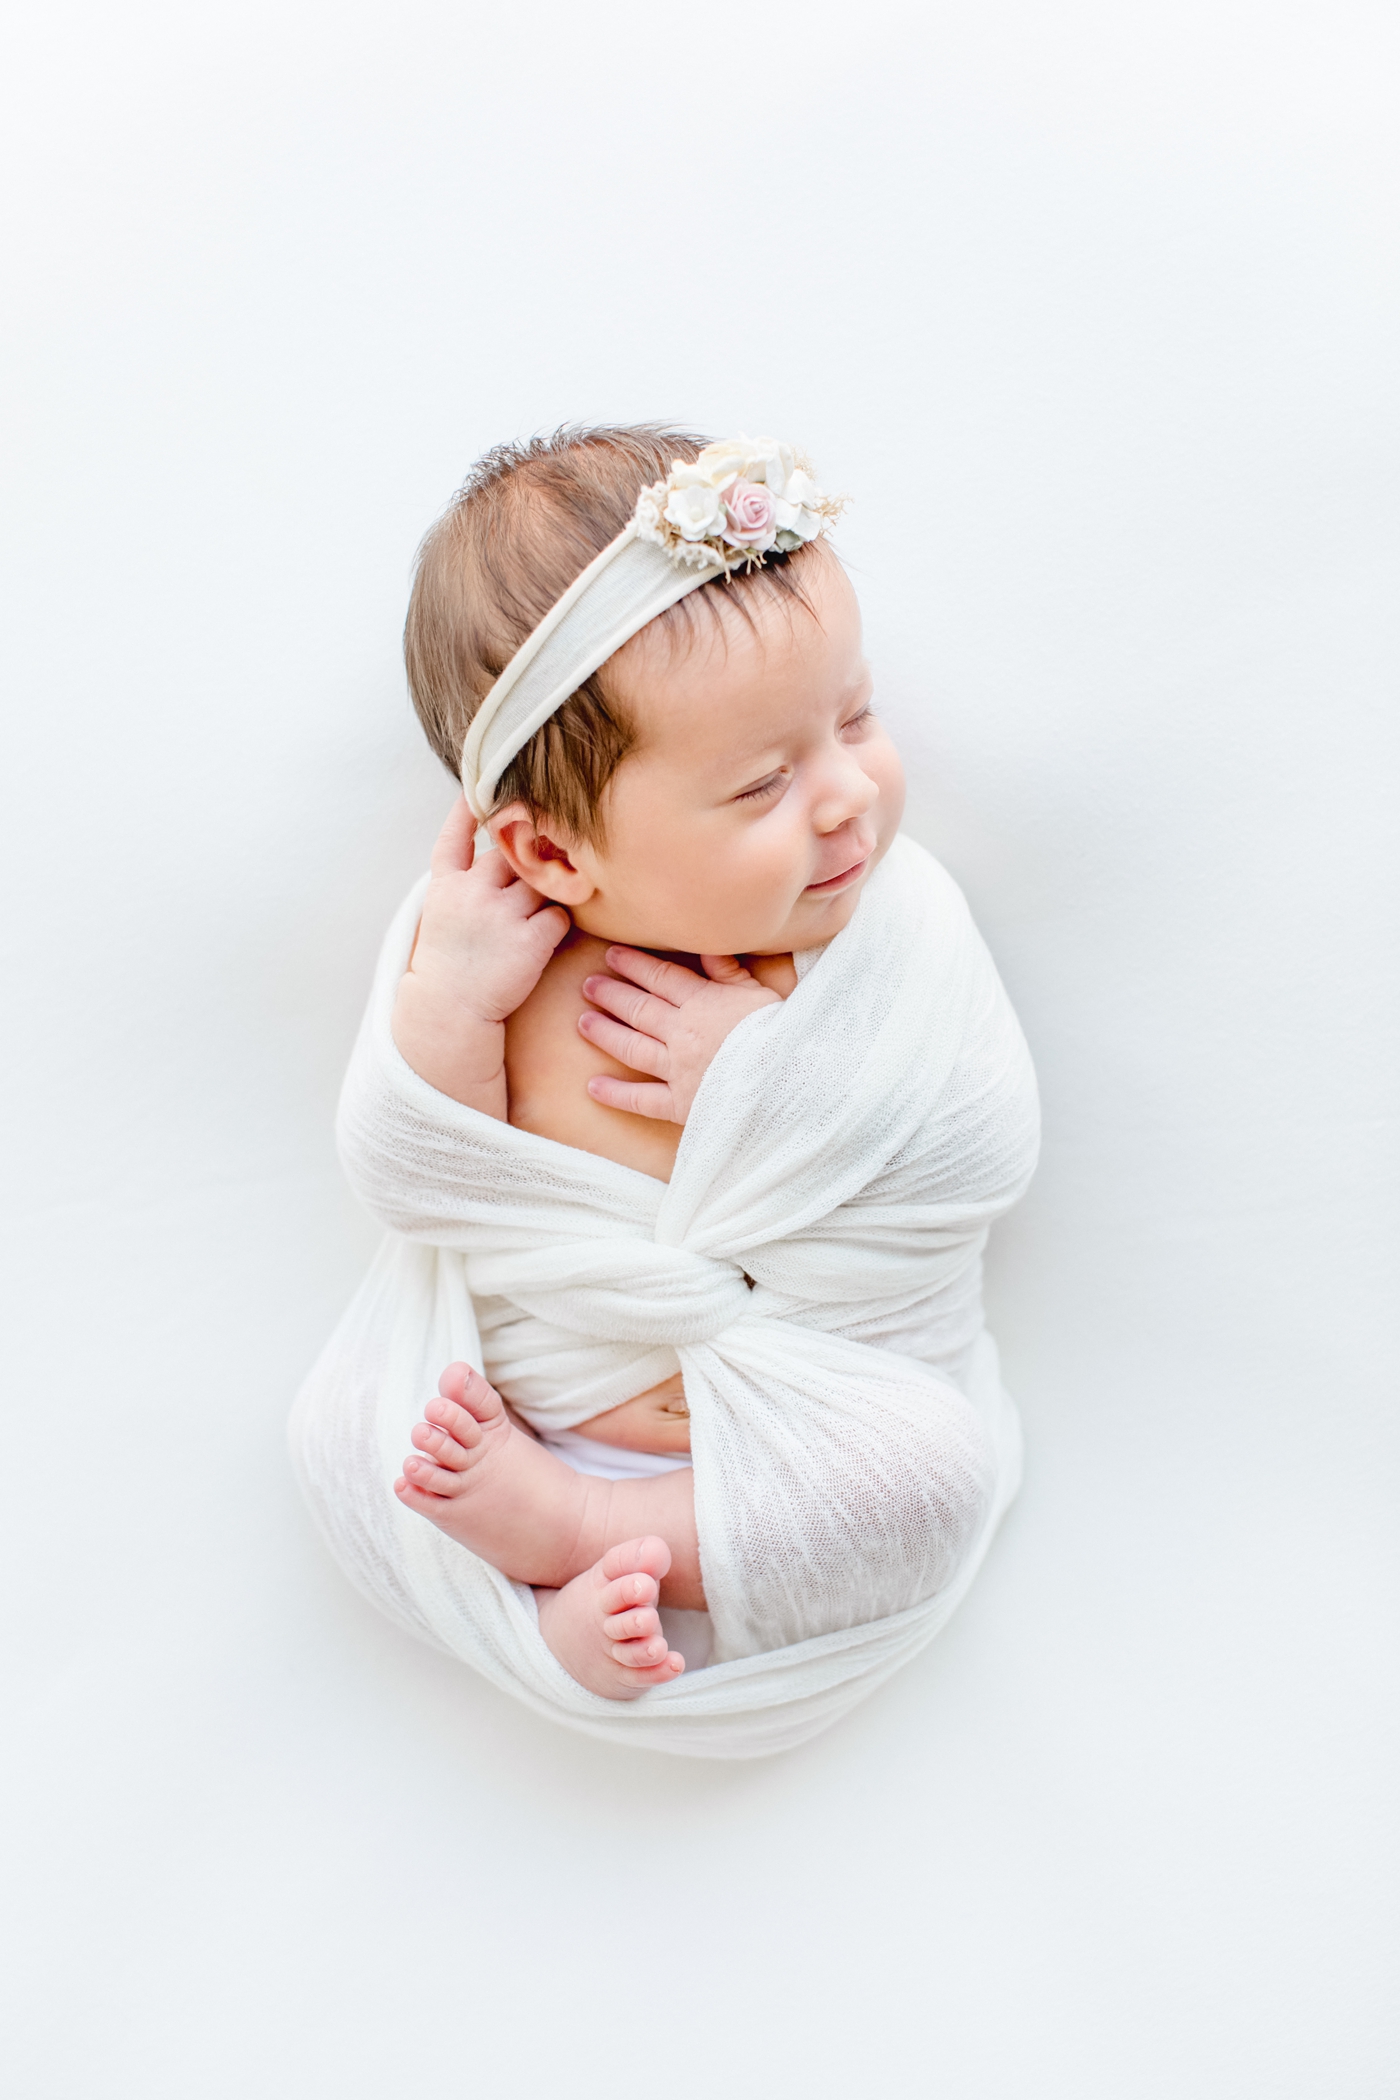 Smiling newborn in white swaddle during Austin TX studio newborn session. Photo by Austin TX baby photographer, Sana Ahmed Photography.